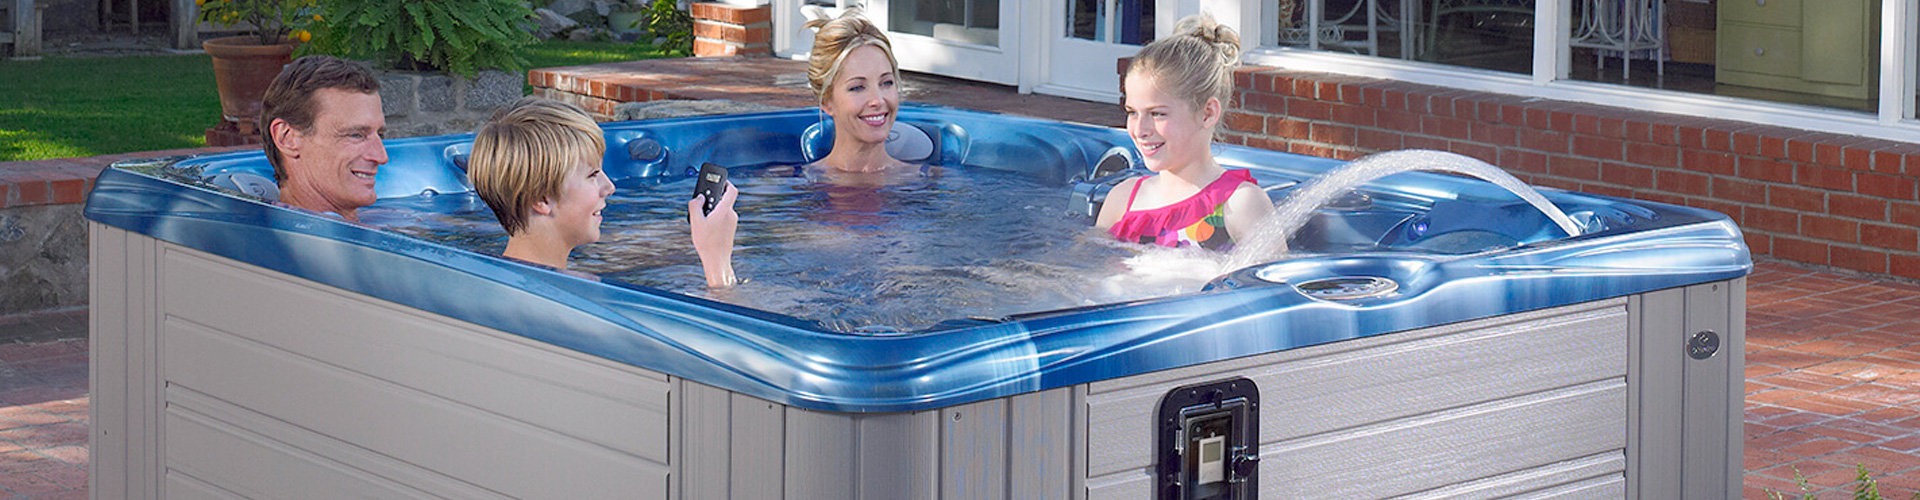 5 Star Rating, Great Review, Best Hot Tub Deals Steamboat Springs